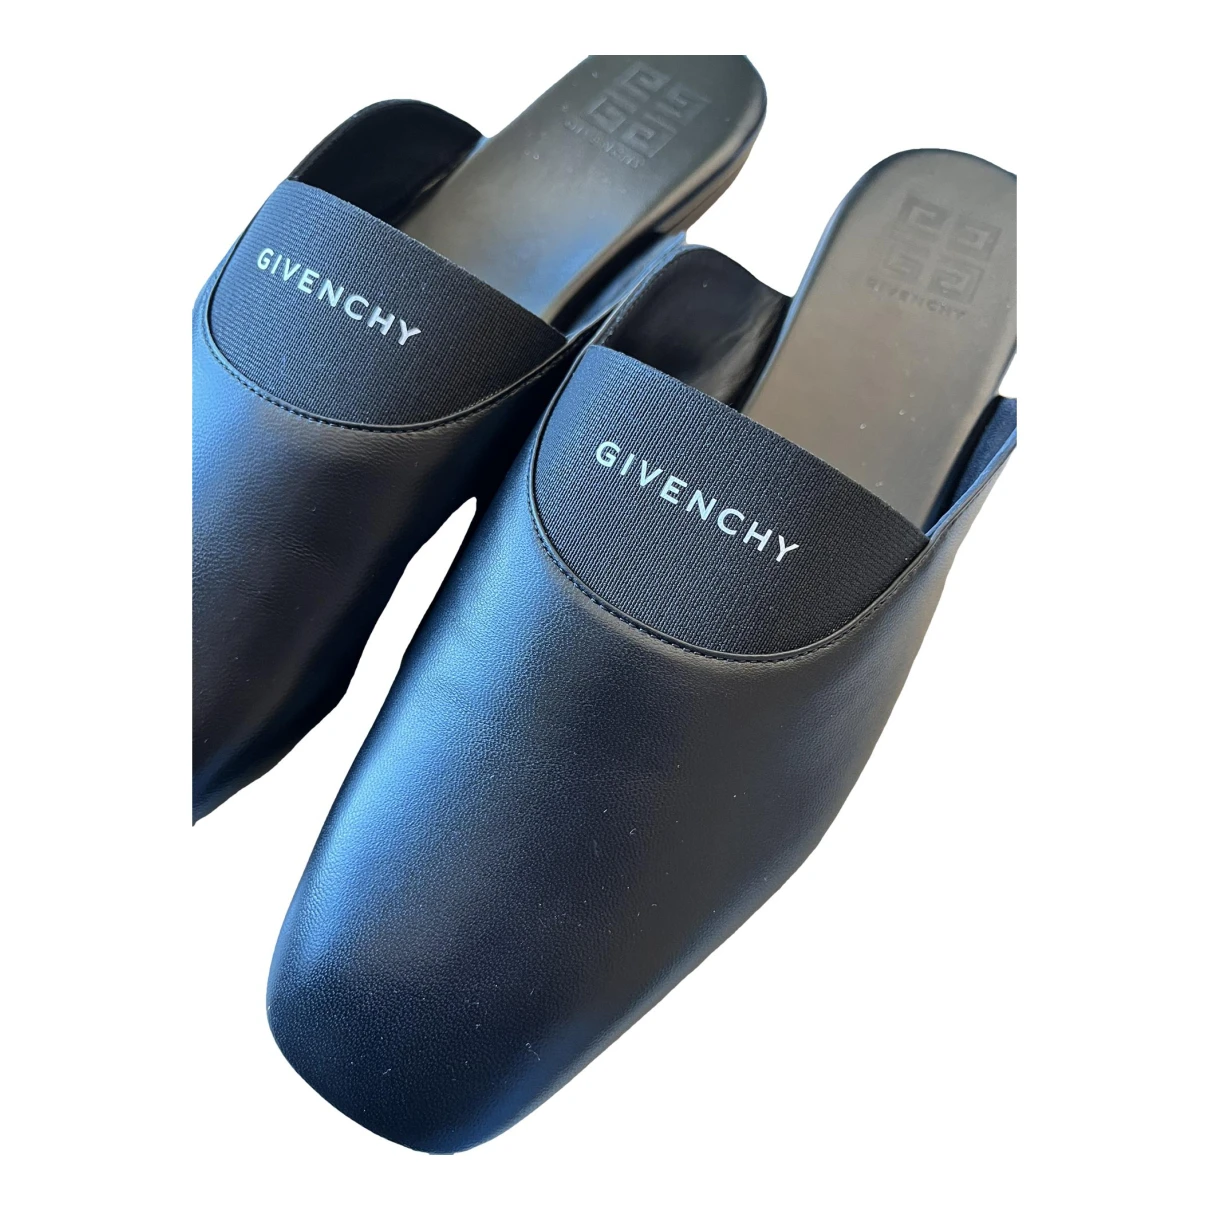 Pre-owned Givenchy Leather Mules & Clogs In Black